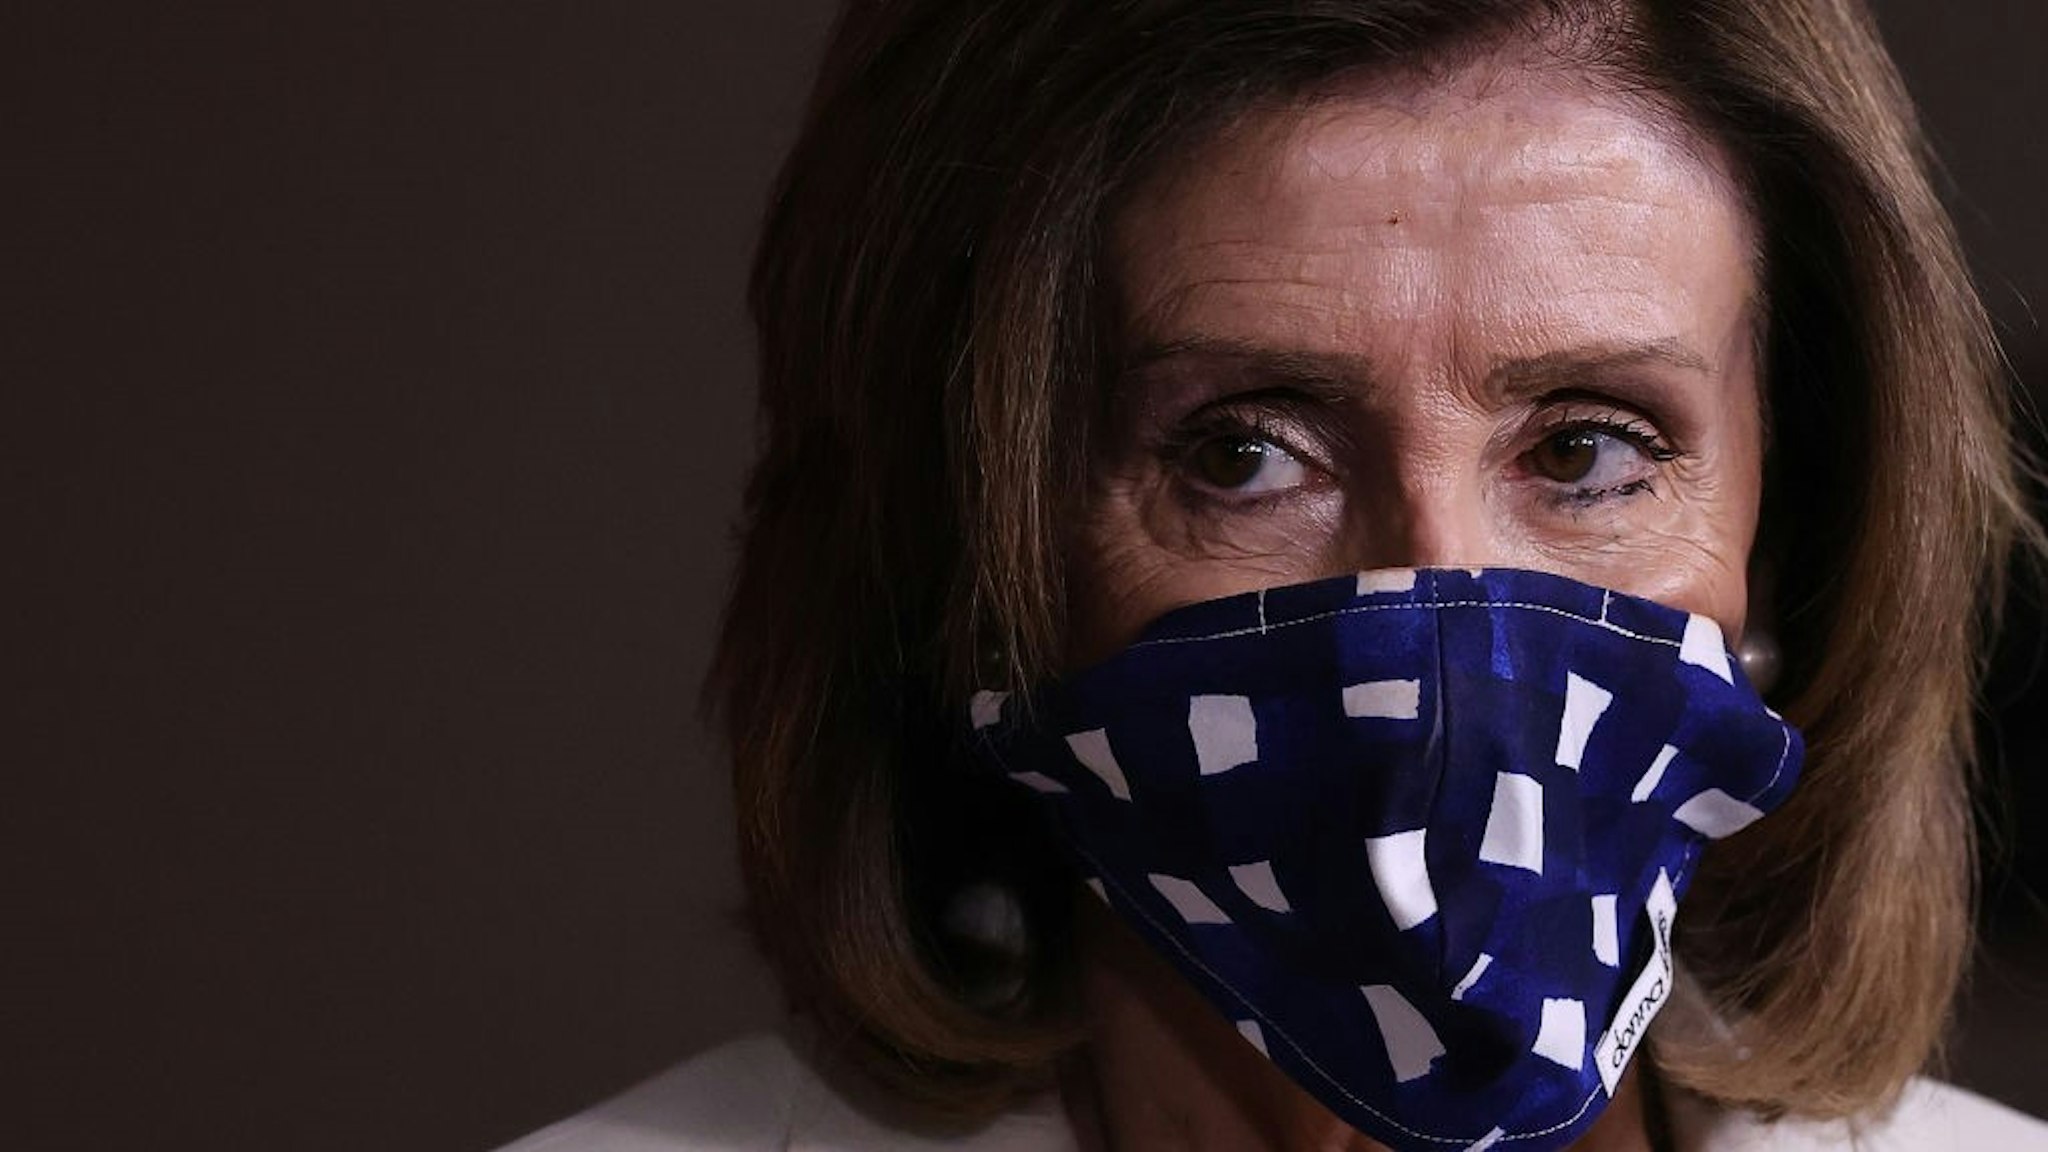 WASHINGTON, DC - APRIL 30: Speaker of the House Nancy Pelosi (D-CA) wears a cloth mask to cover her mouth and nose to prevent the spread of the novel coronavirus during her weekly news conference at the U.S. Capitol April 30, 2020 in Washington, DC. While she and Democratic House leaders are not going to reconvene next week due to the COVID-19 pandemic, she said committee chairs are working on the next piece of economic rescue legislation. (Photo b